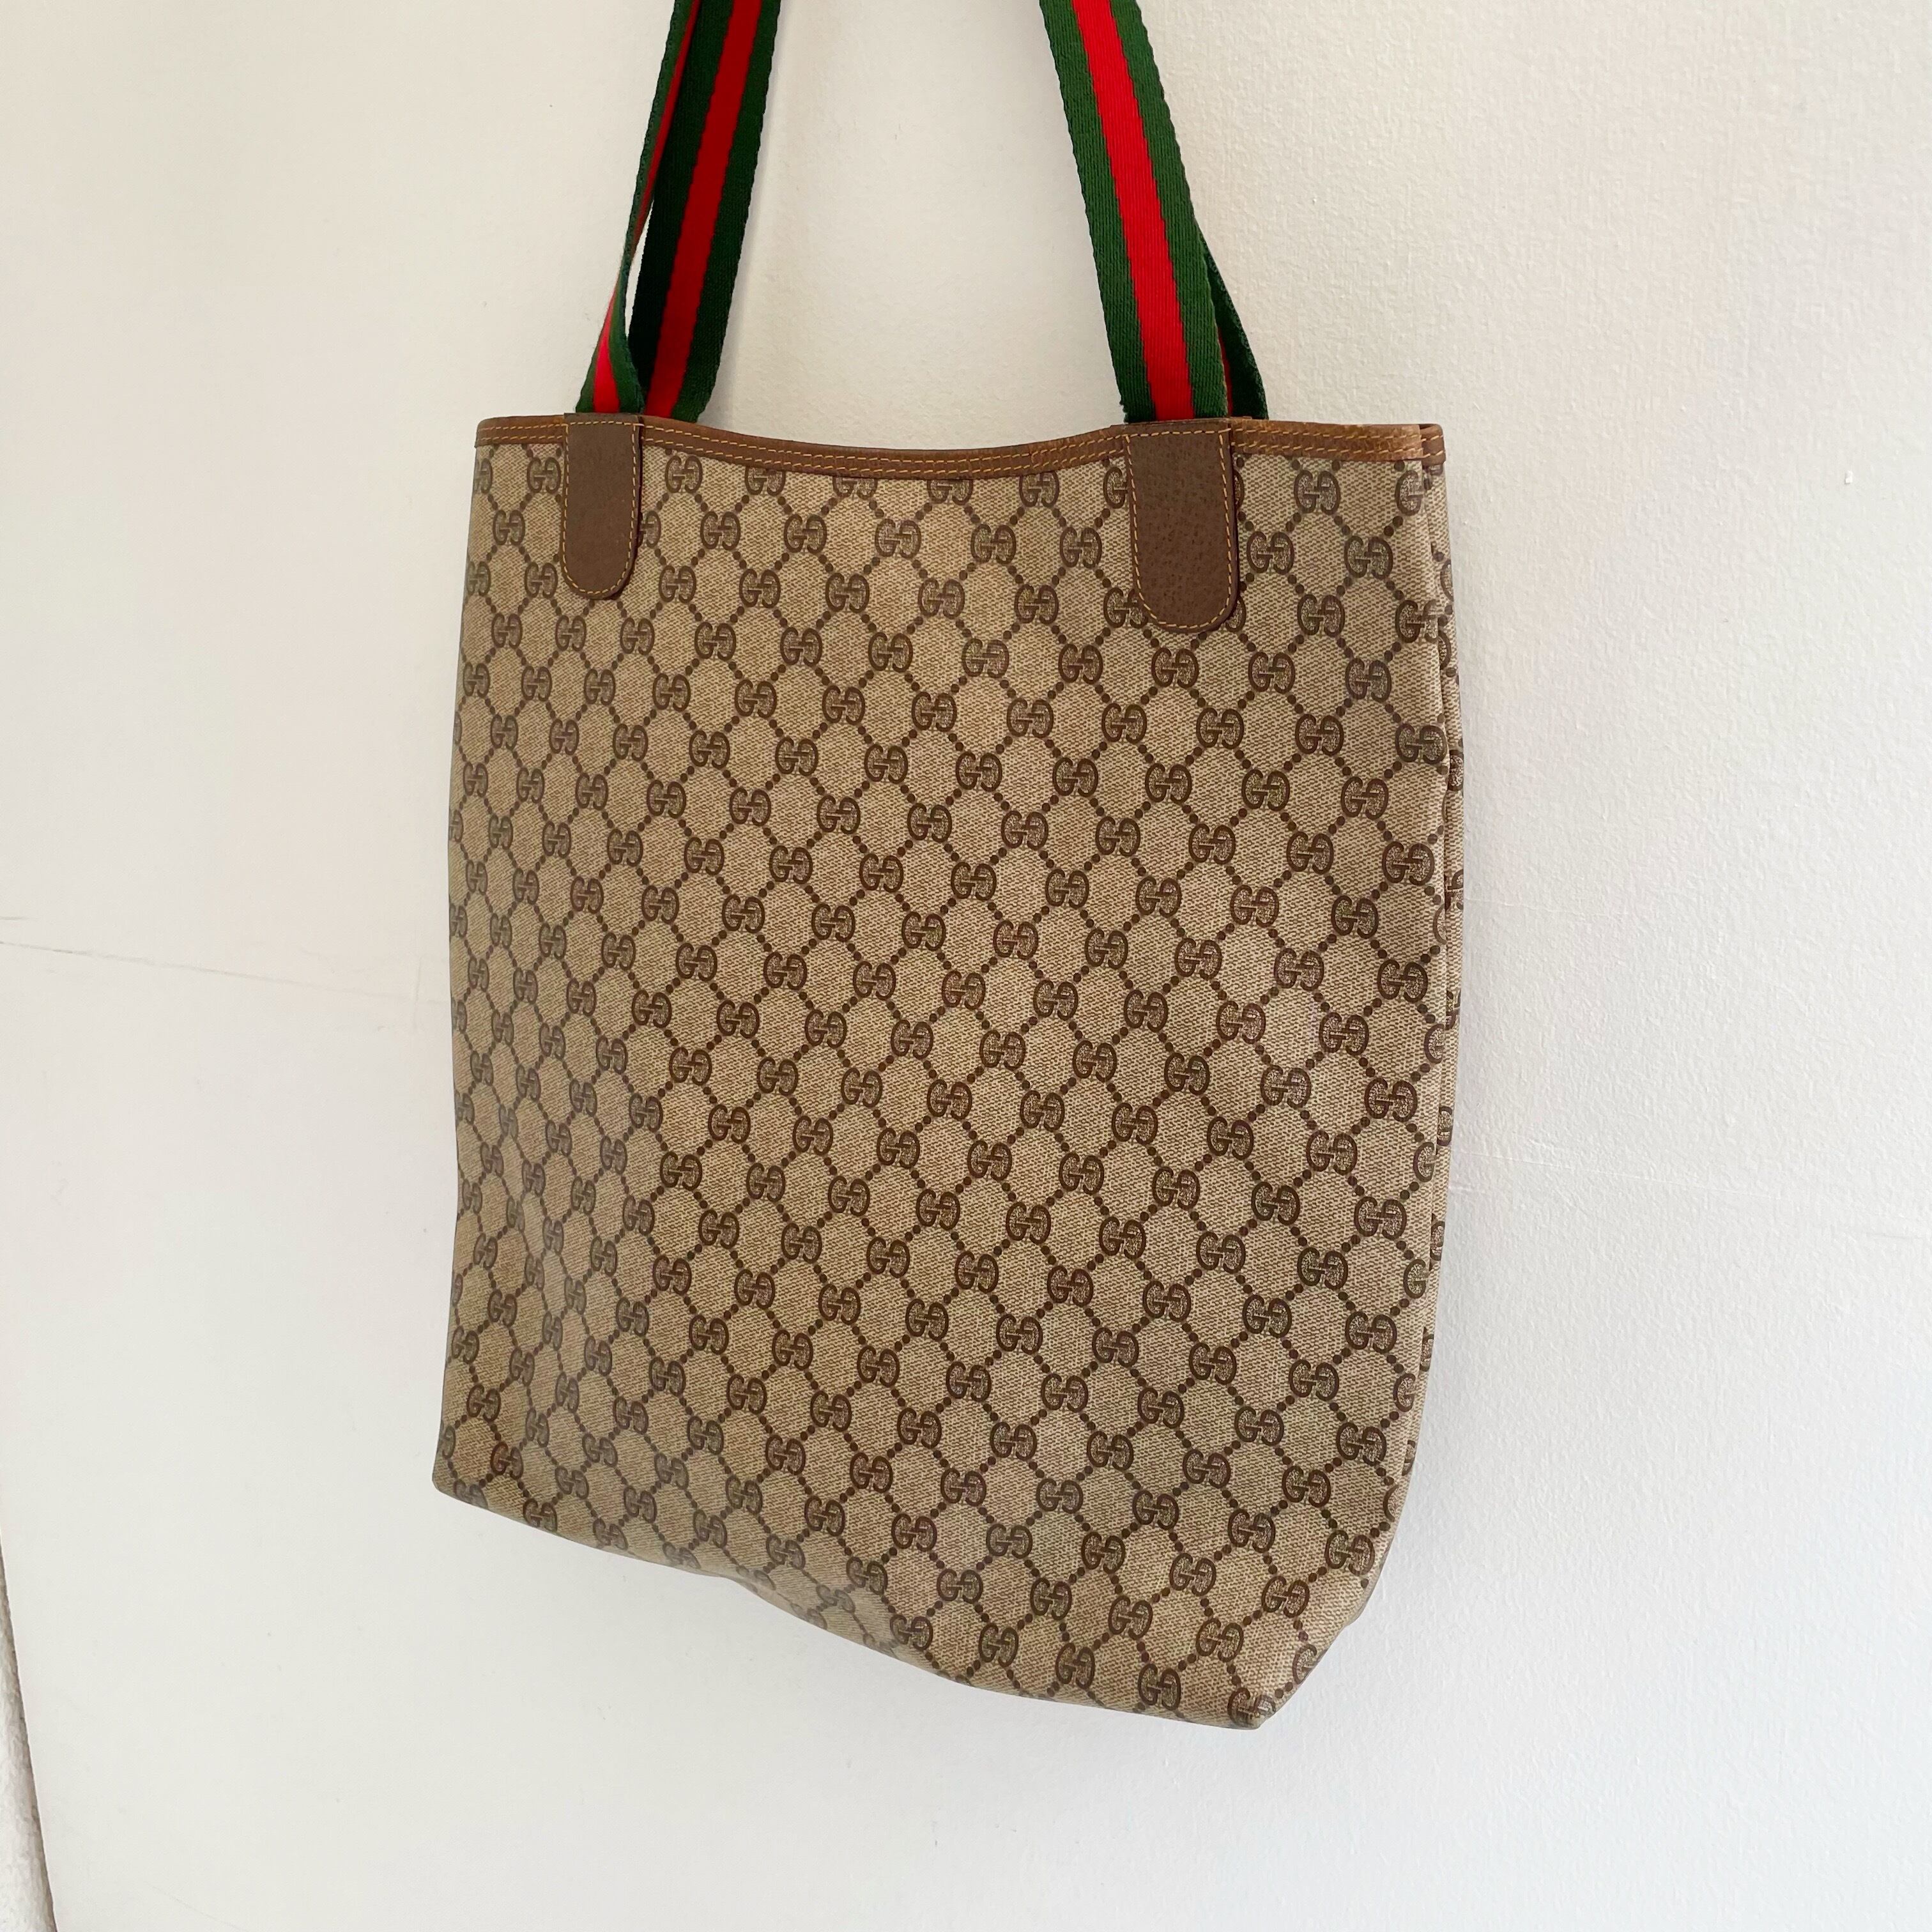 OLD GUCCI tote bag | TOKYO LAMPOON online shop